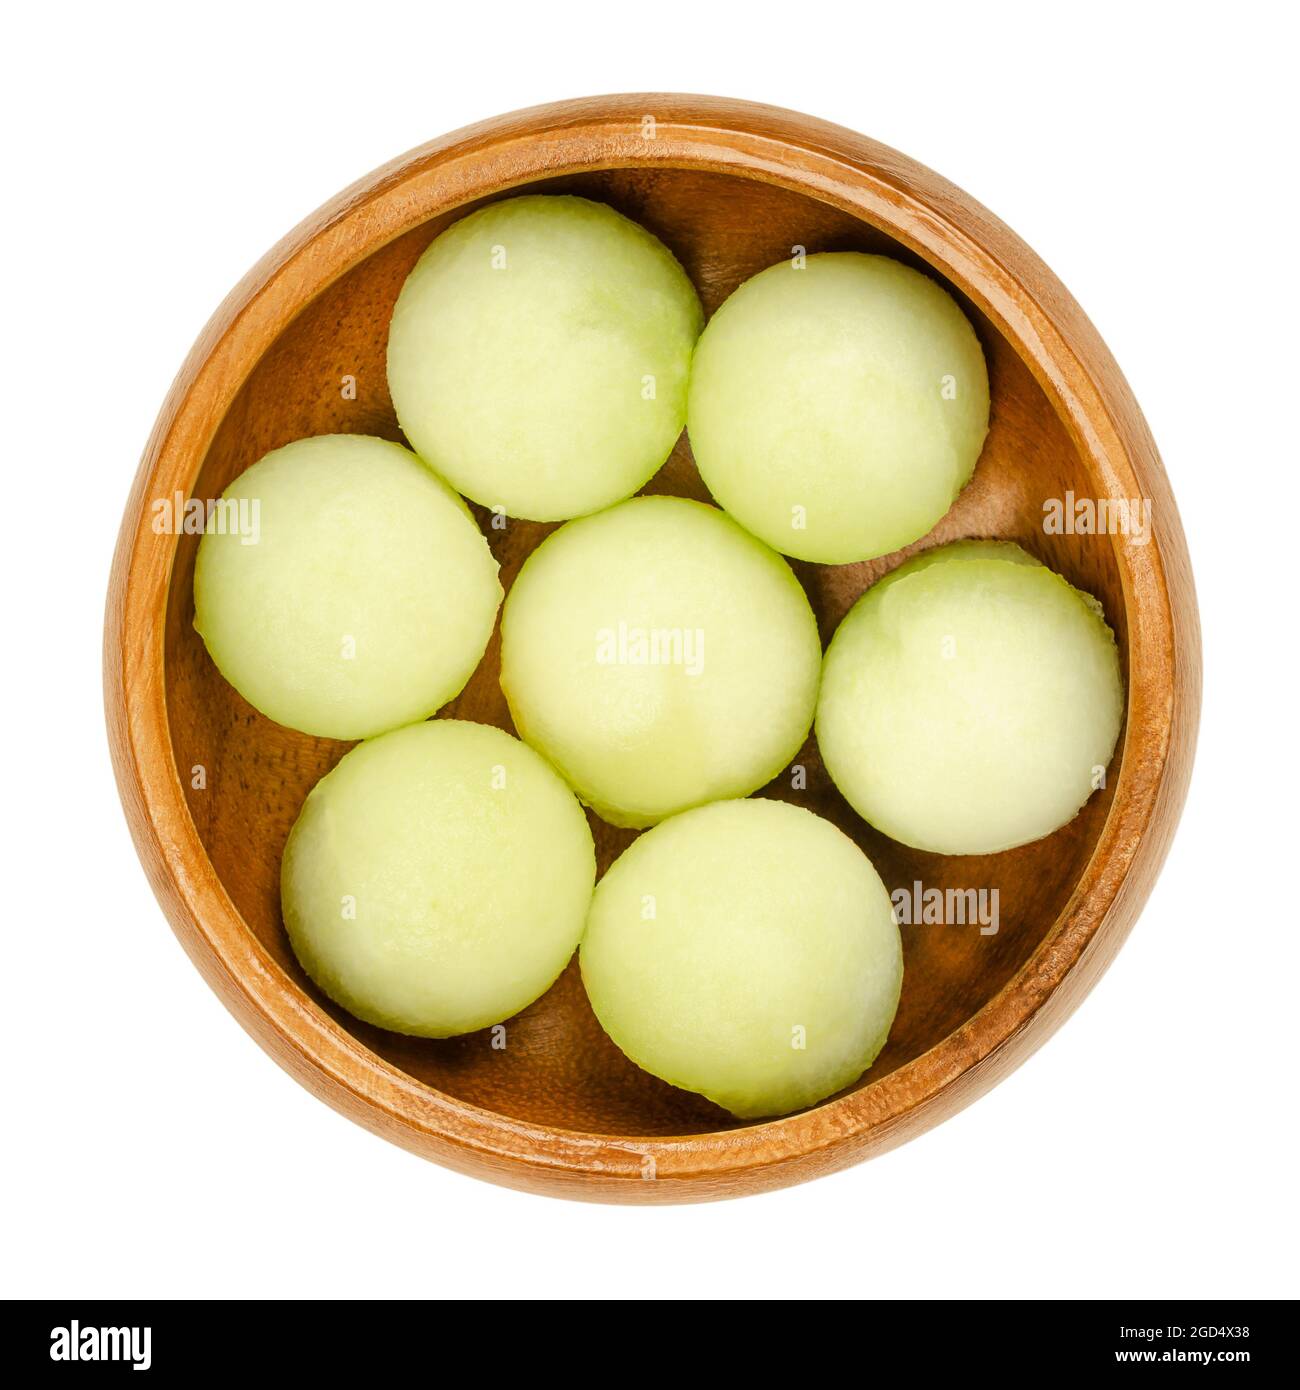 Galia melon balls, in a wooden bowl. Freshly cut out with a melon baller, ready-to-eat pieces of a ripe fruit of Cucumis melo var. reticulatus. Stock Photo